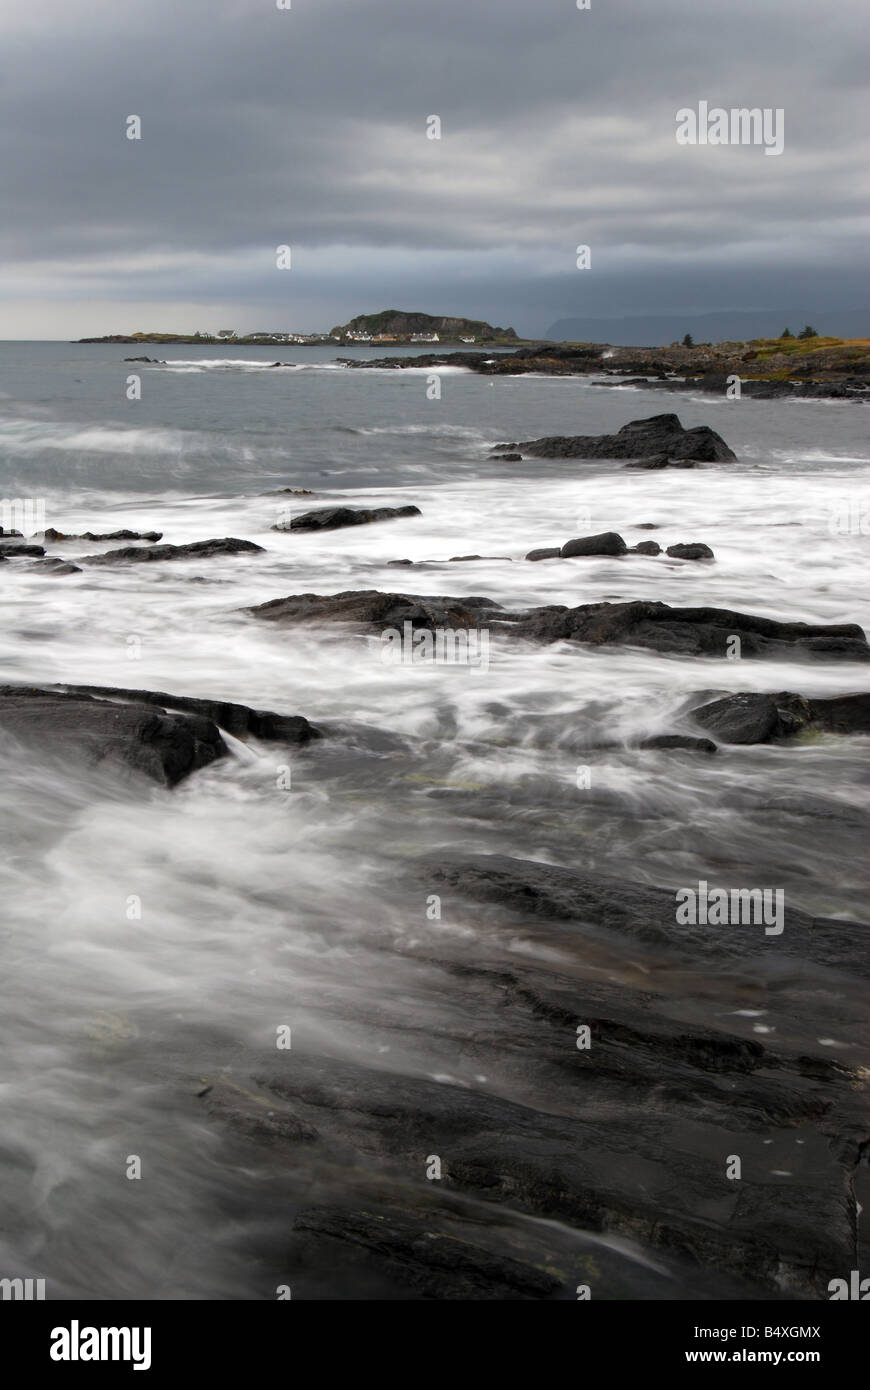 Stormy seas on the coast of Scotland with a view to Easdale Island, Seil, Argyll and Bute, Scotland, UK Stock Photo